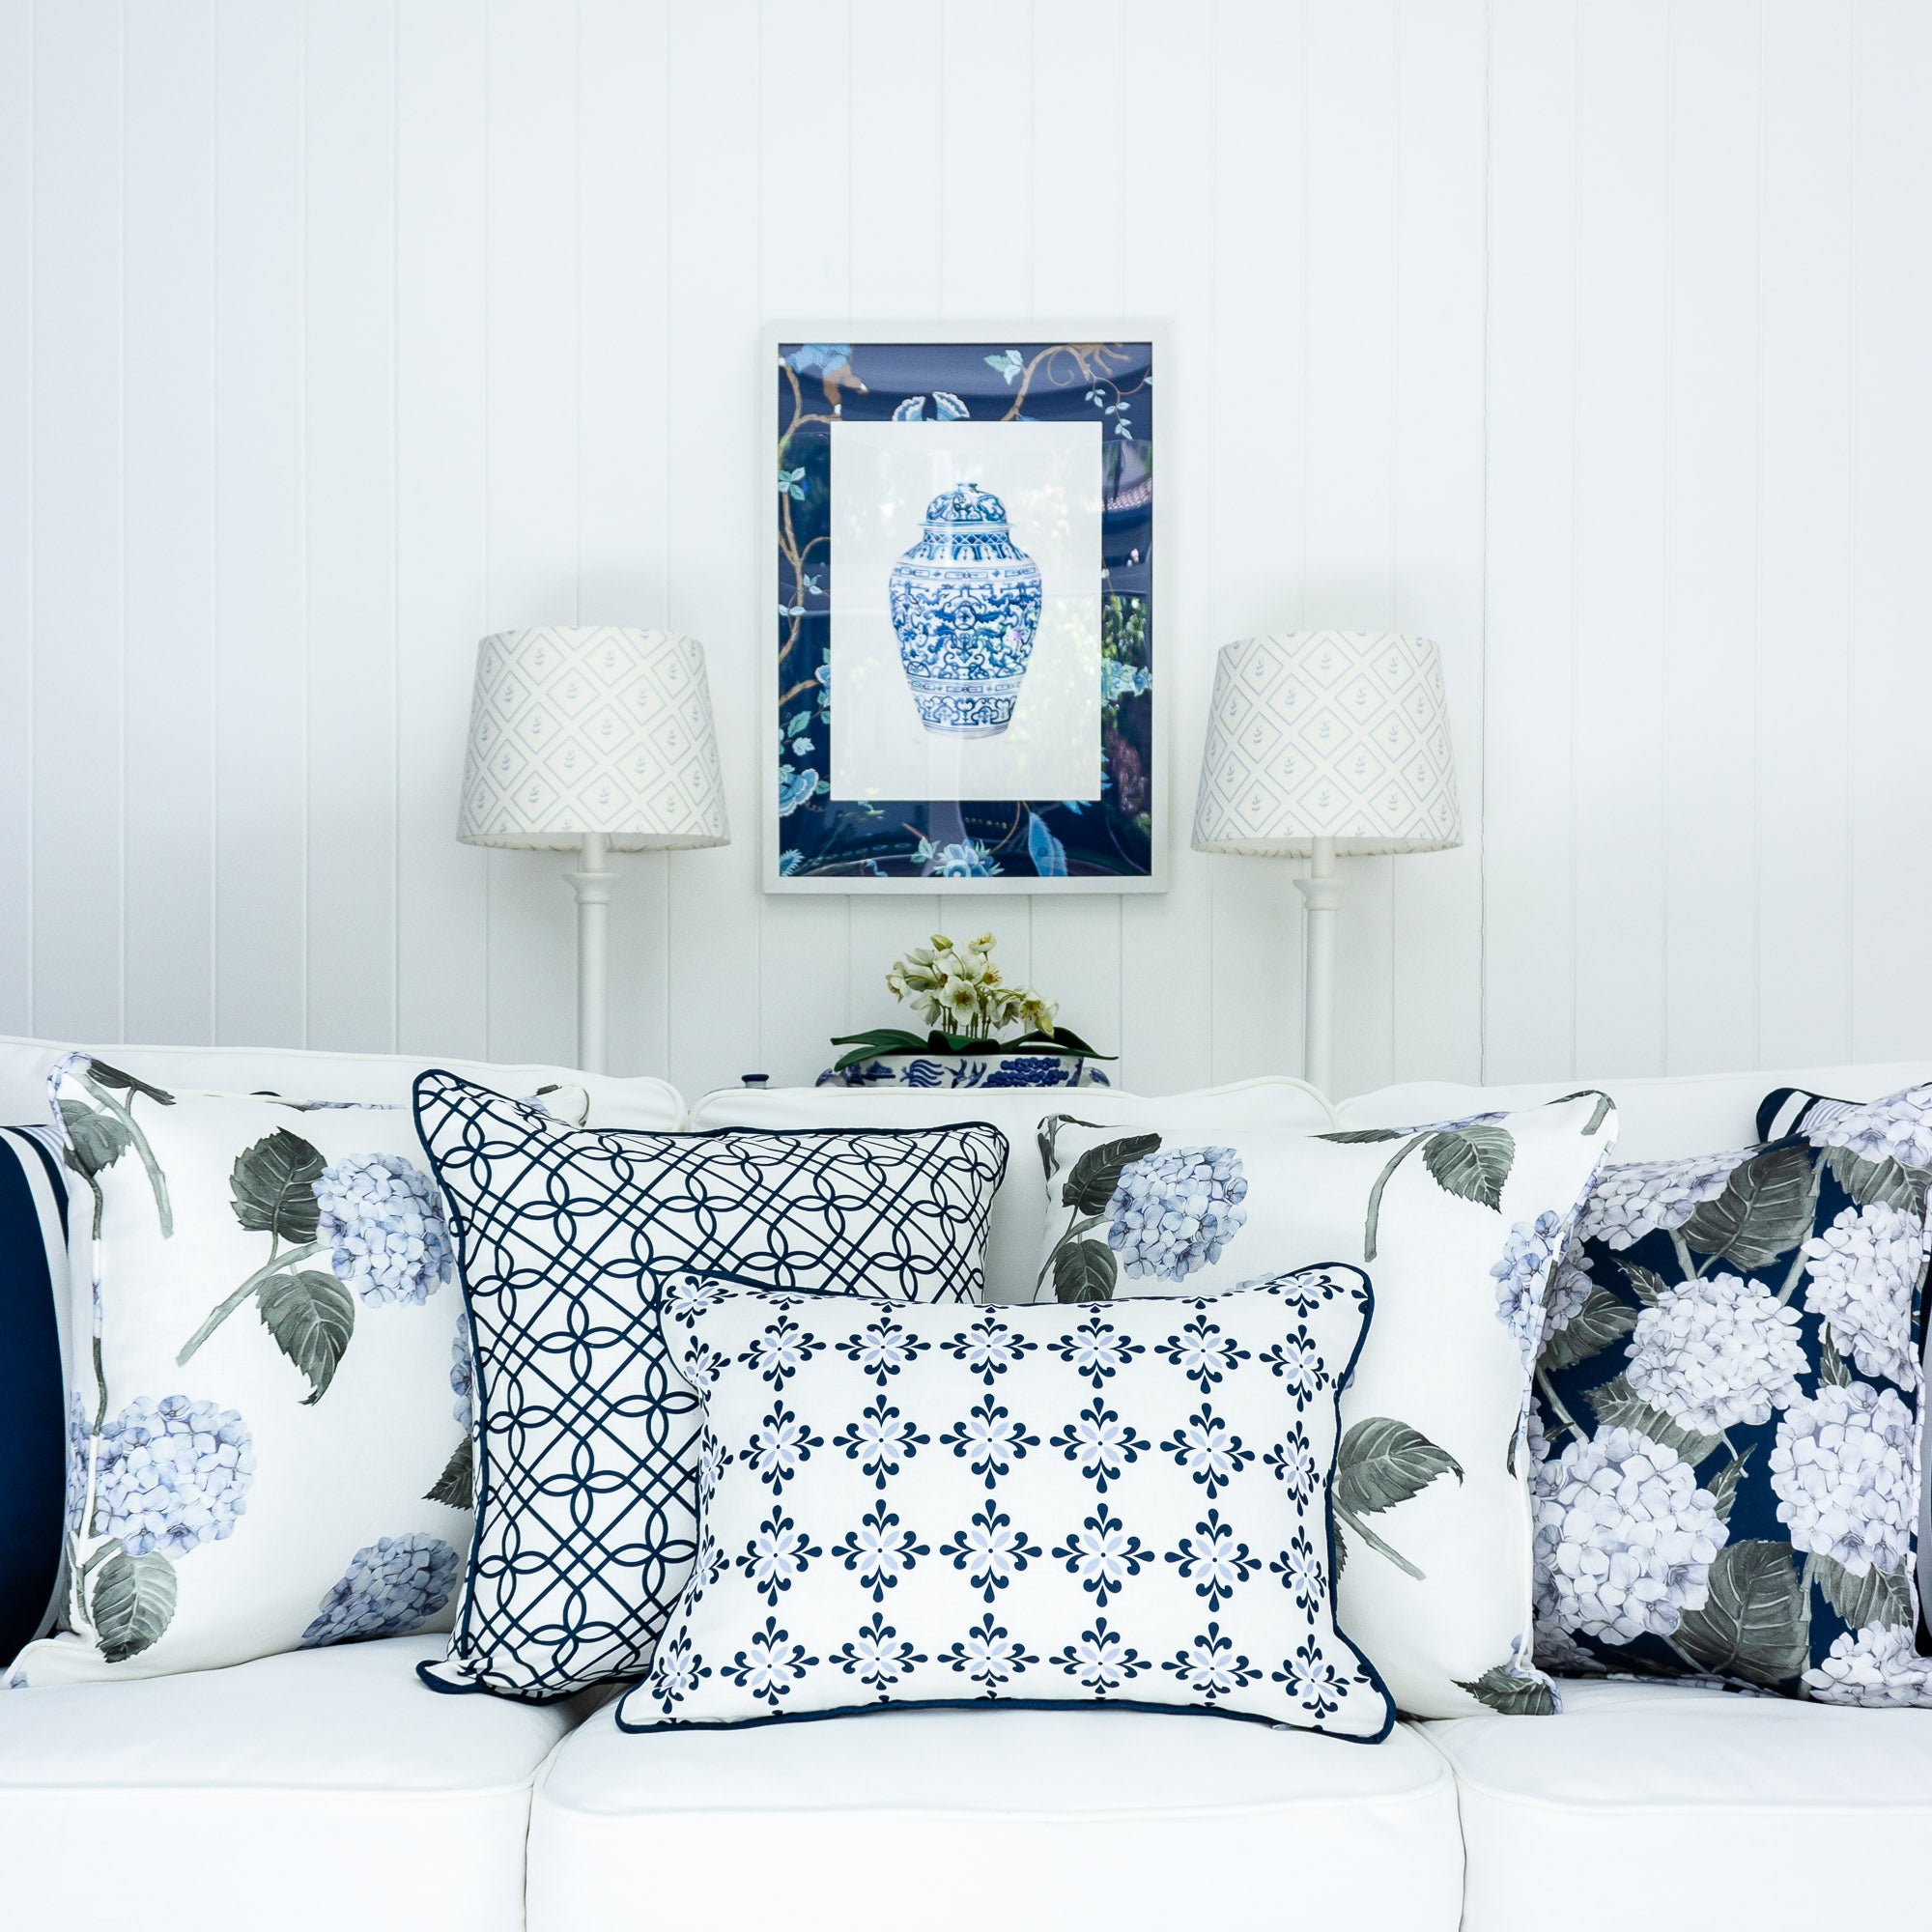 Blue_White_Cushion_Collection-8_922198f8-3f8f-4ce7-bc55-a79dcbbe6a4f.jpg